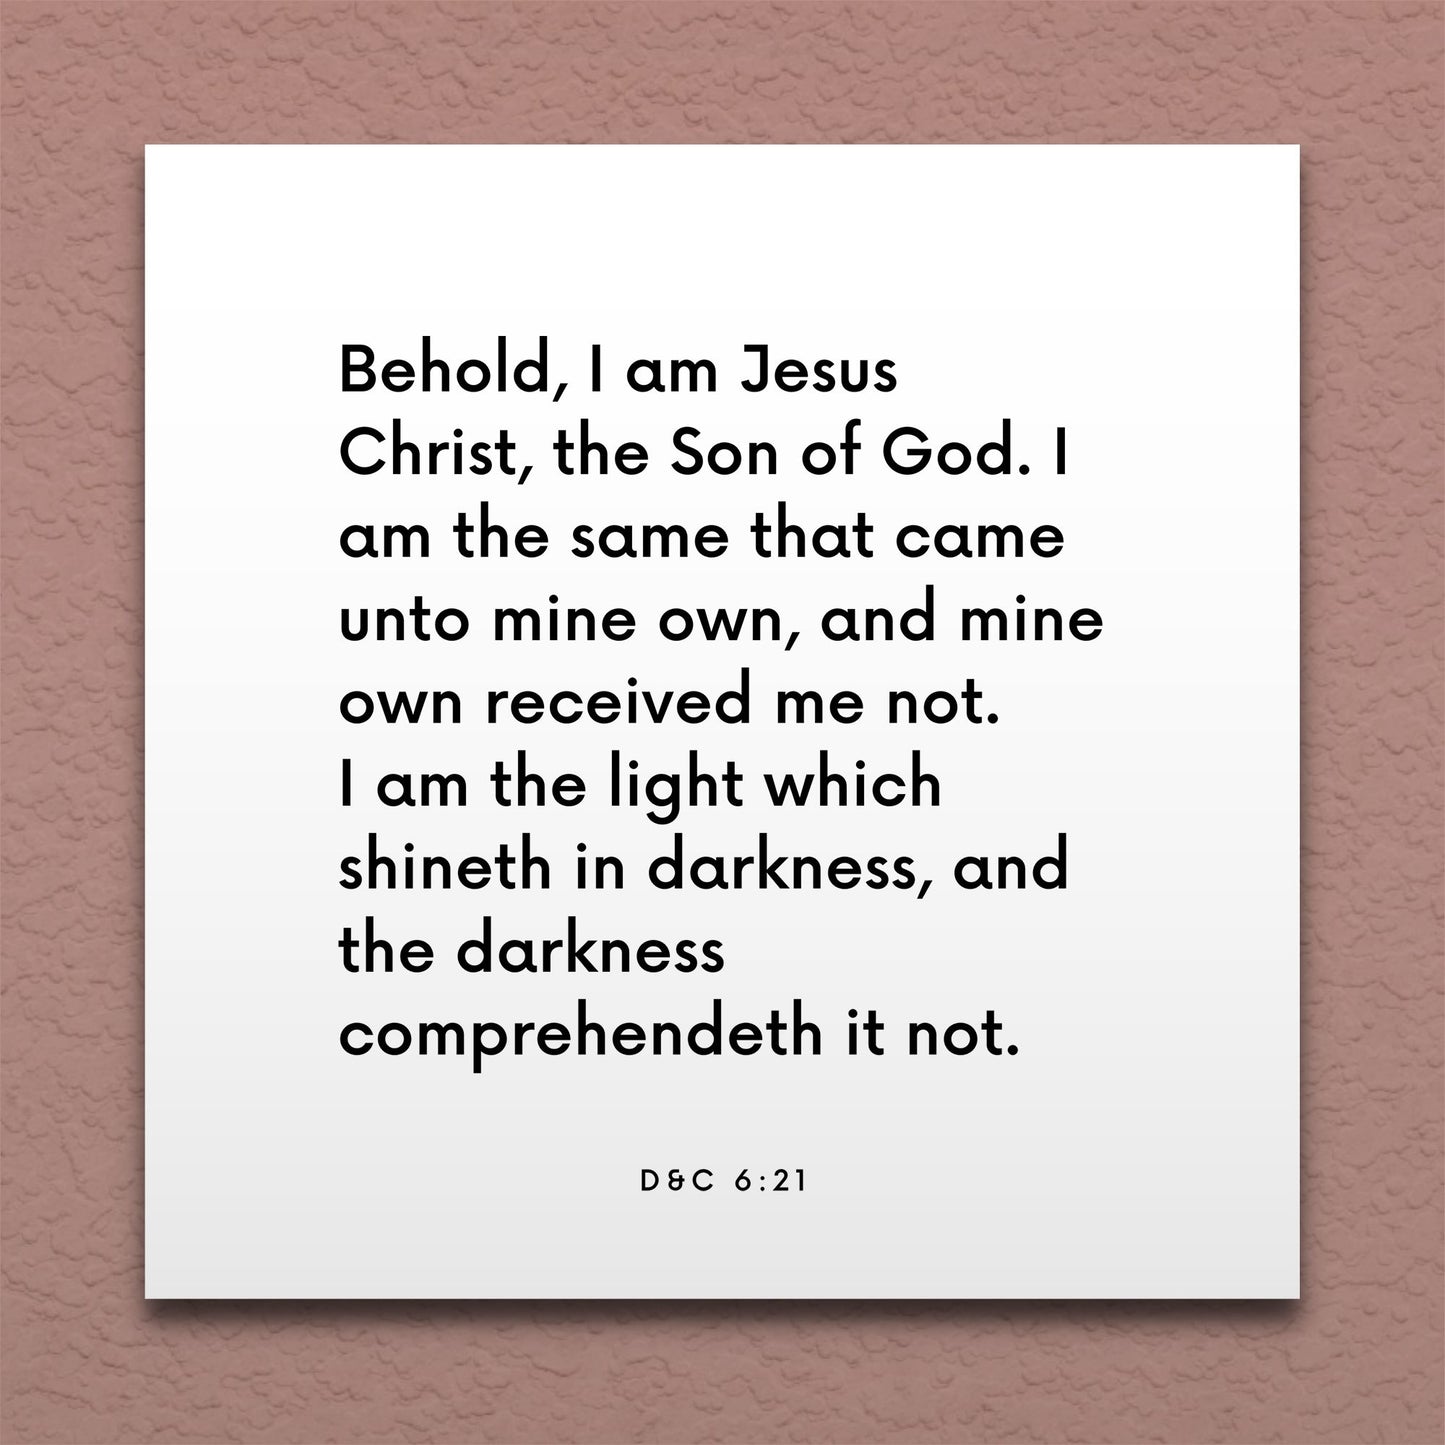 Wall-mounted scripture tile for D&C 6:21 - "I am the light which shineth in darkness"